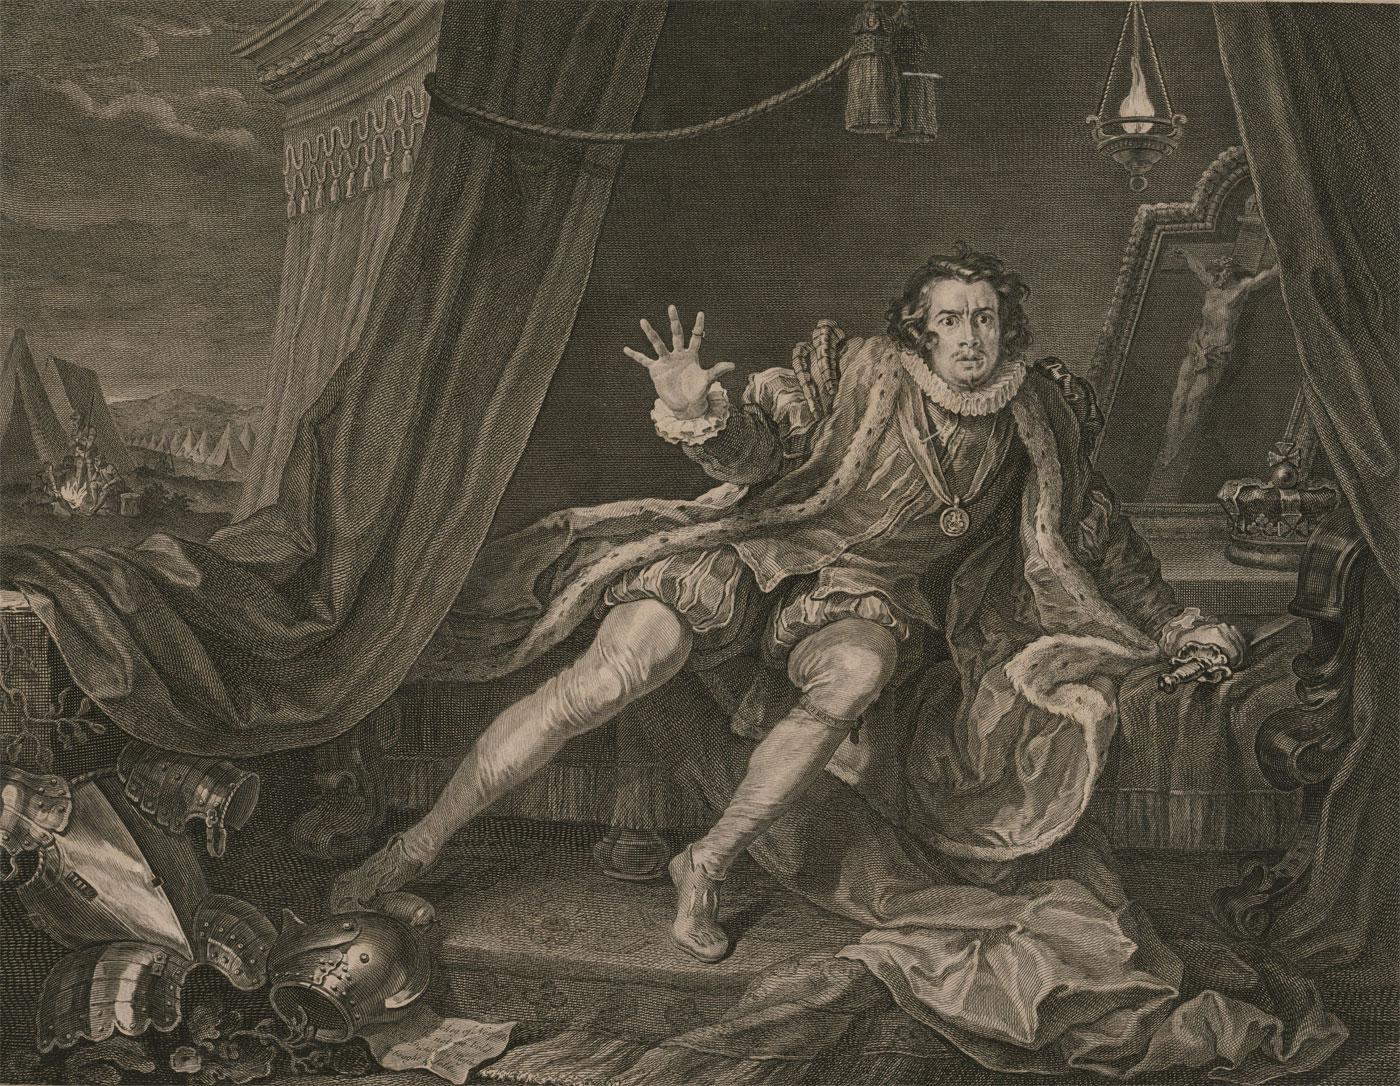 A very fine 18th century copper plate engraving from William Hogarth and Charles Grignion (1721–1810). Hogarth depicts his close friend, the actor David Garrick, as Richard III waking from a vision of the ghosts of those he murdered to attain the